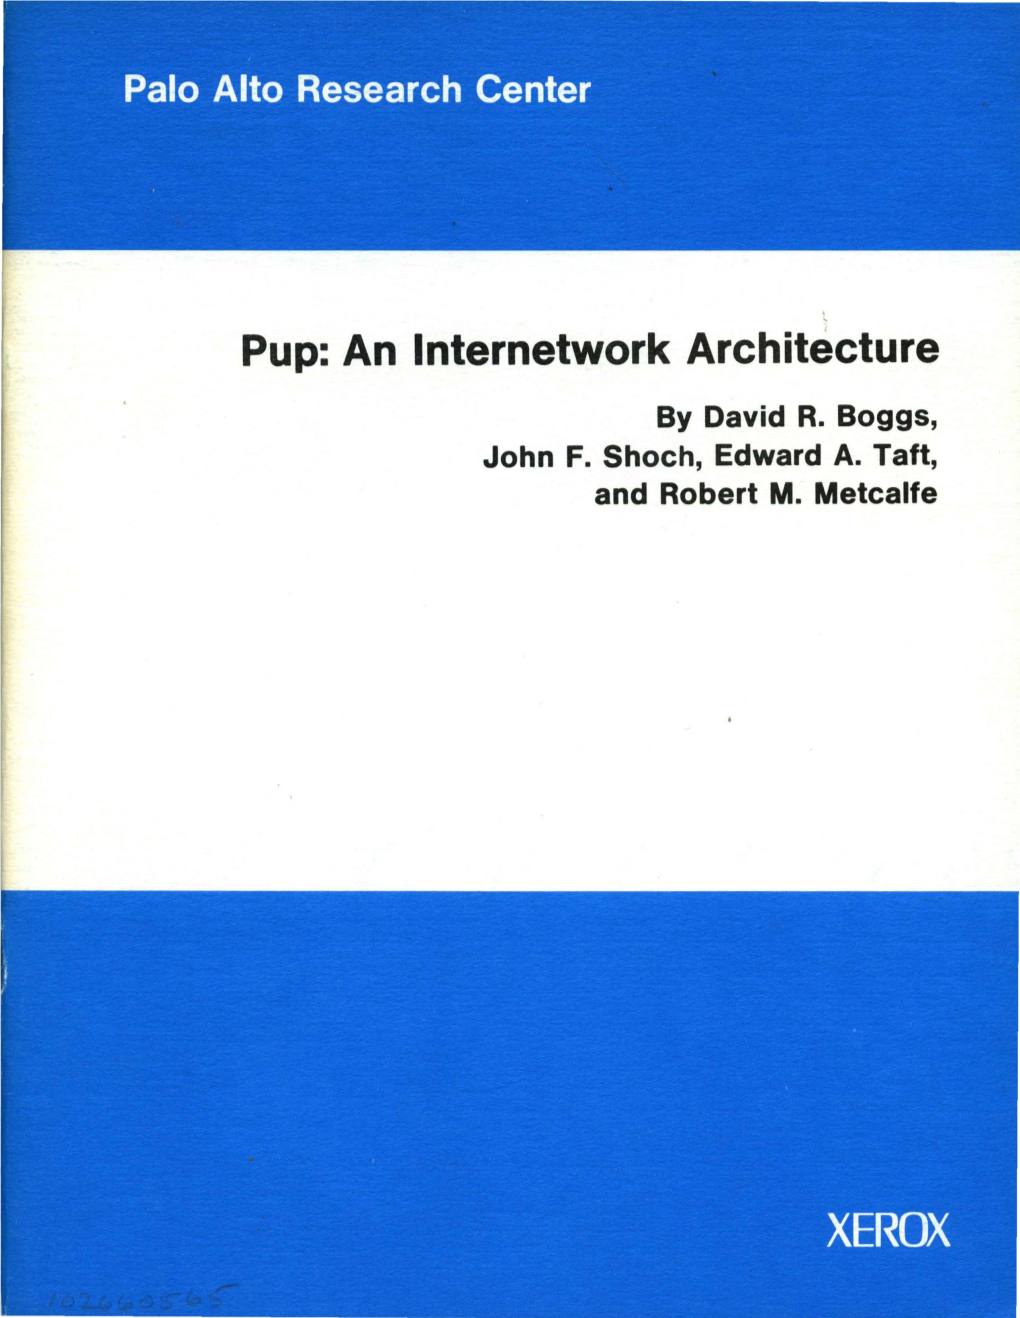 Pup: an Internetwork Architecture